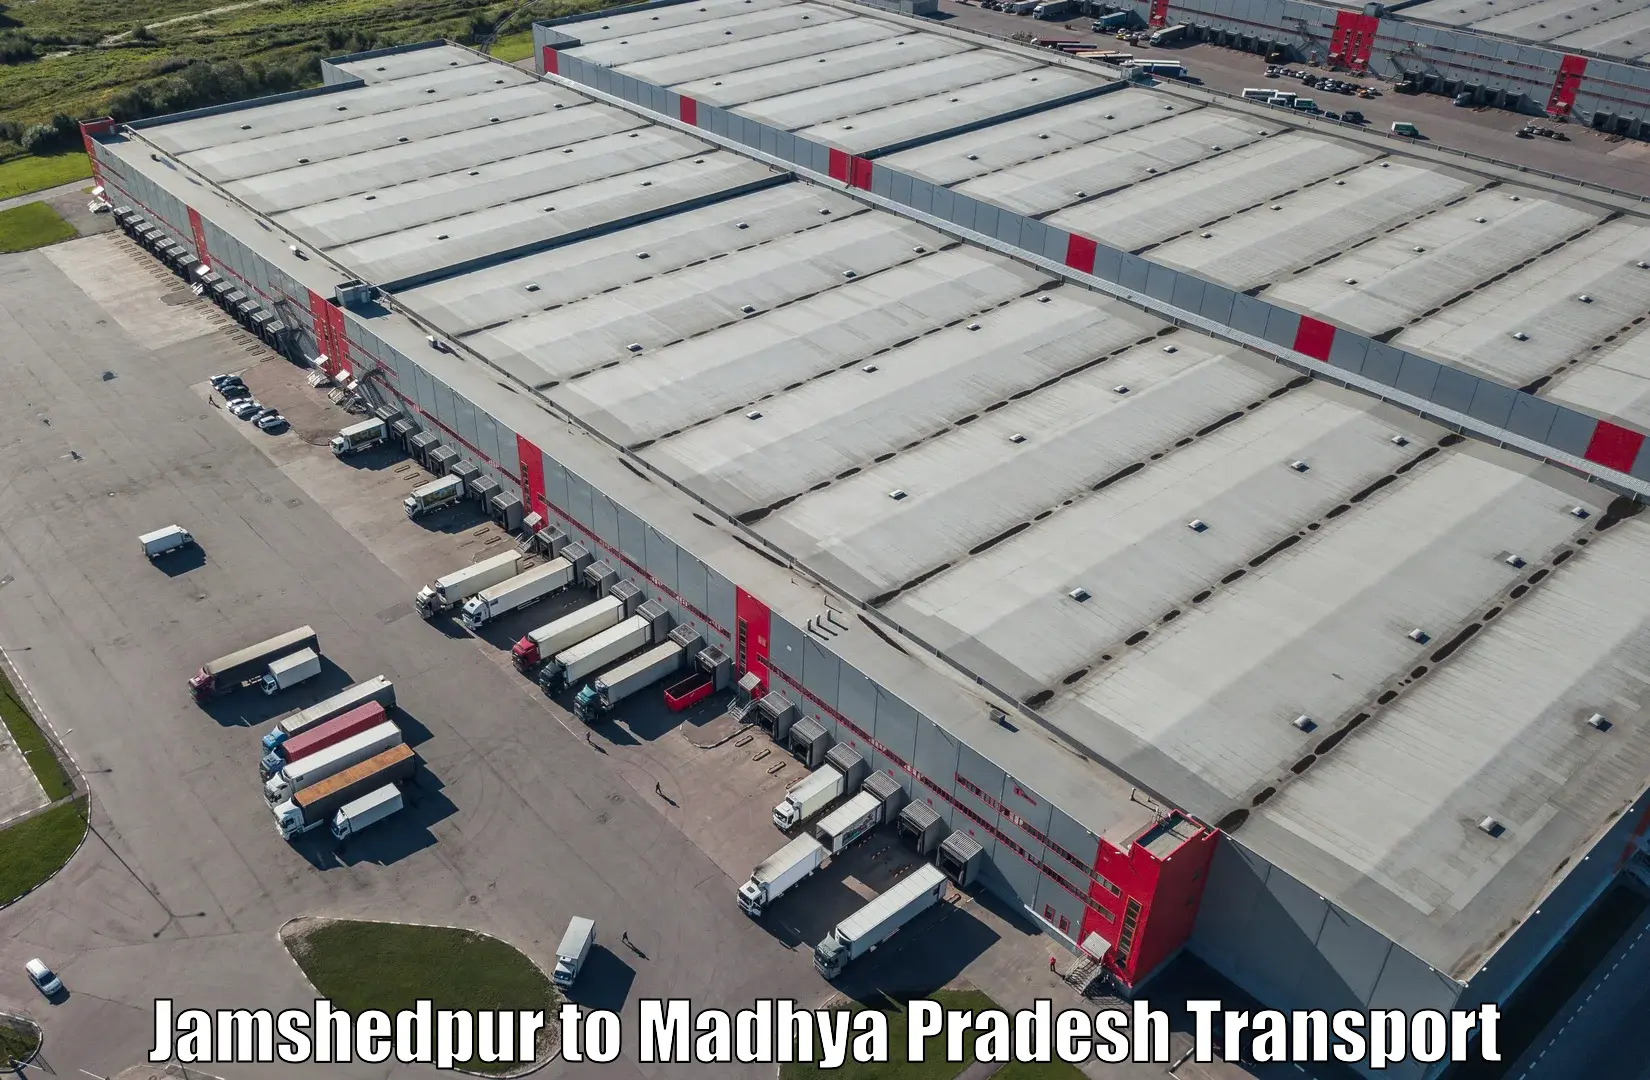 Express transport services Jamshedpur to Chand Chaurai